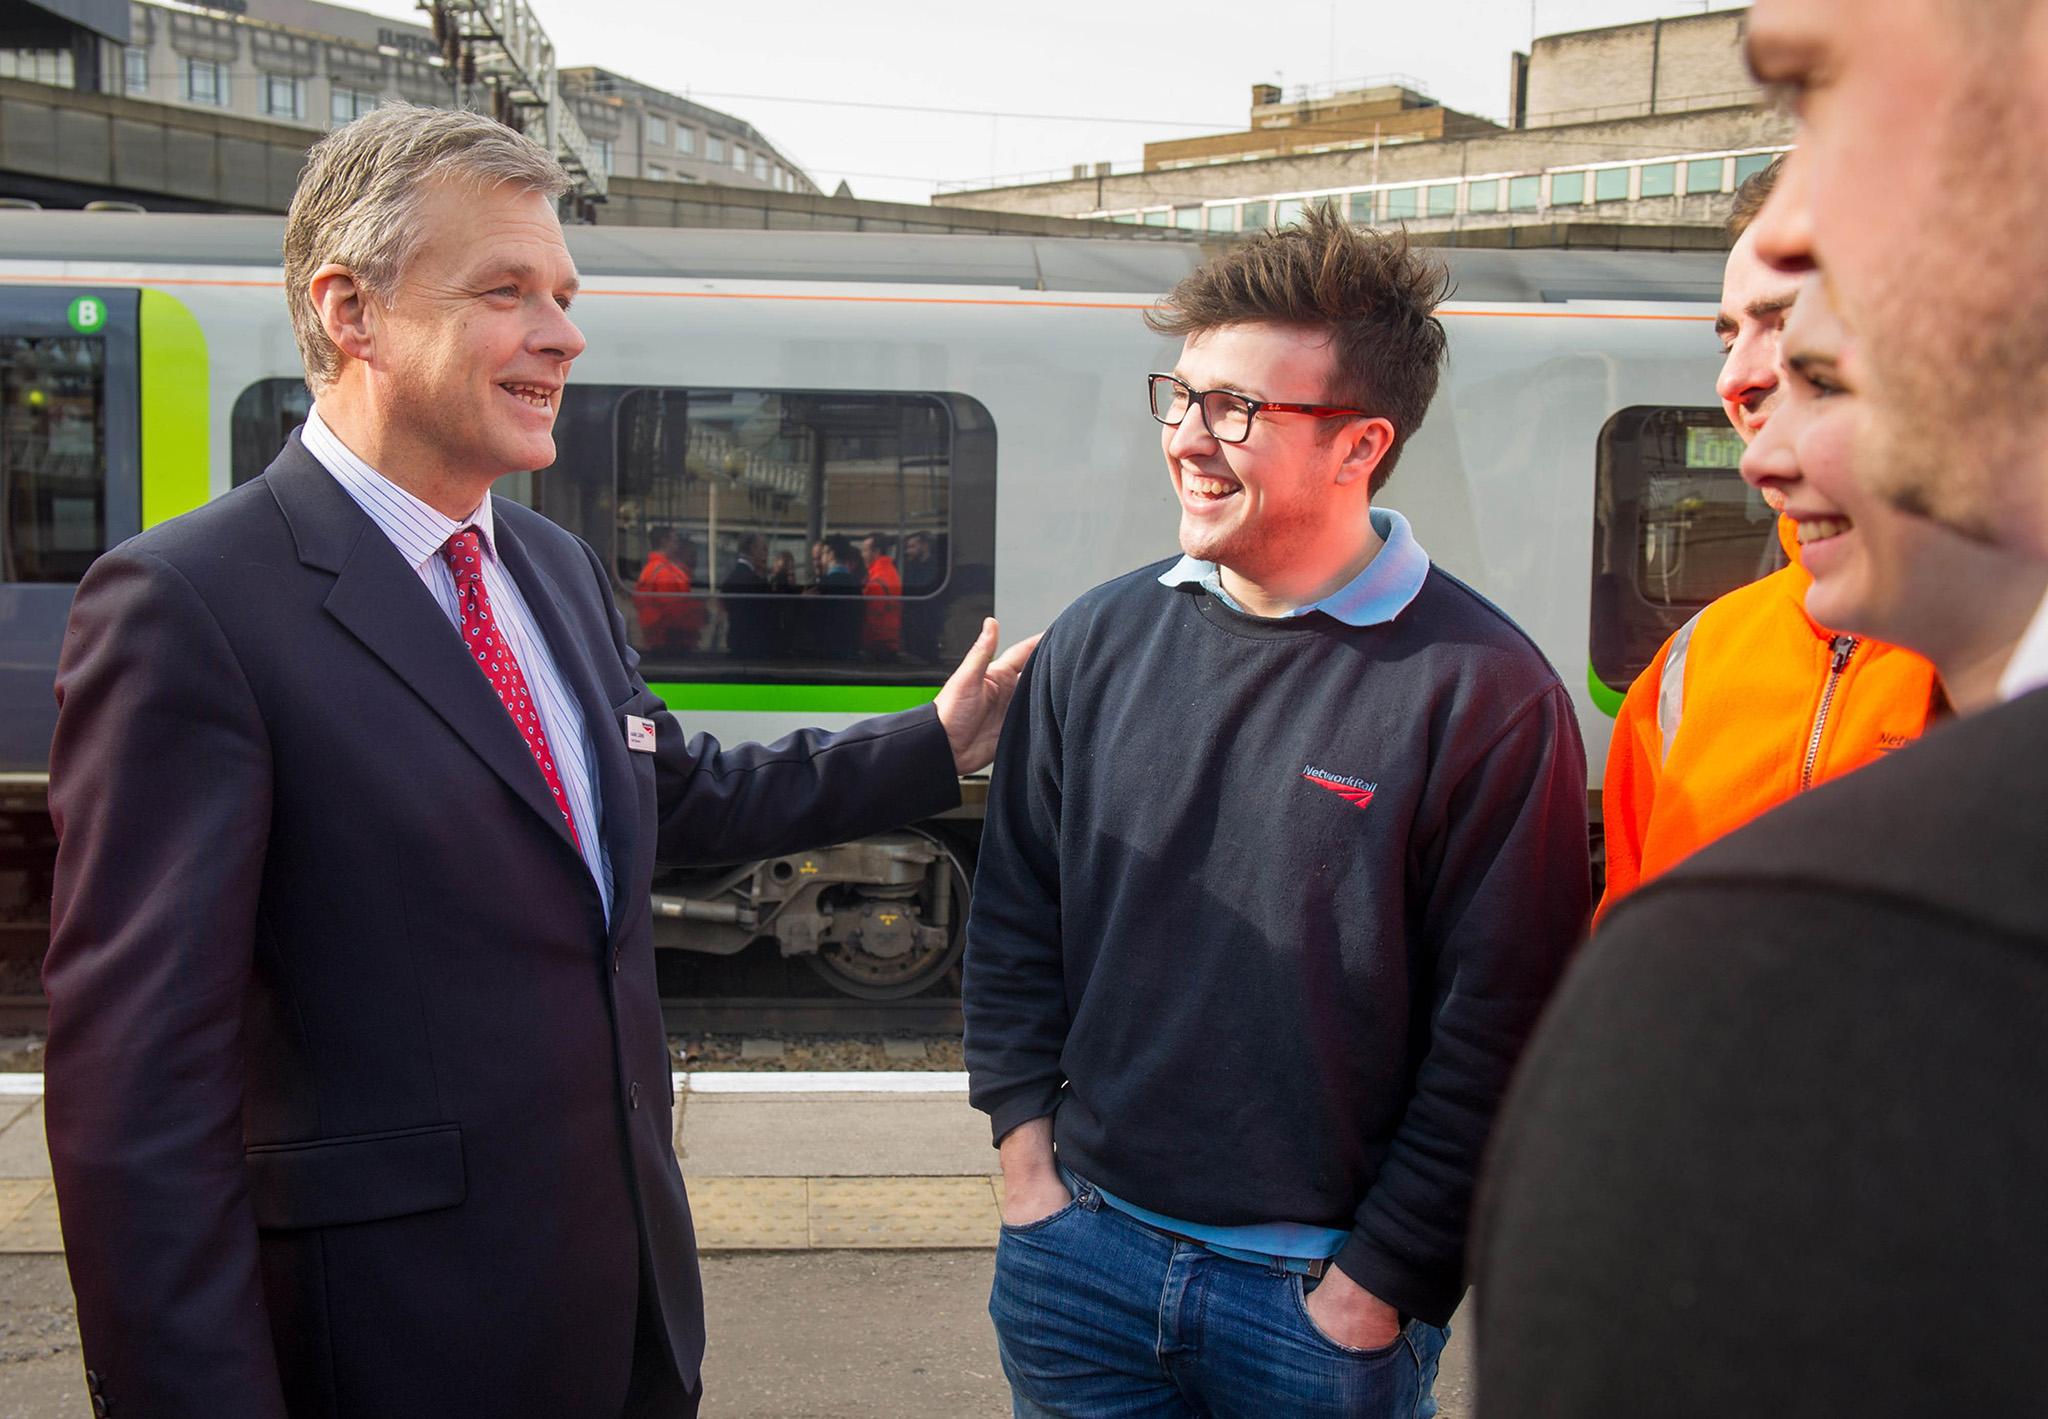 Network Rail chief Mark Carne (left) meets an apprentice. He is set for a salary increase and five figure bonus